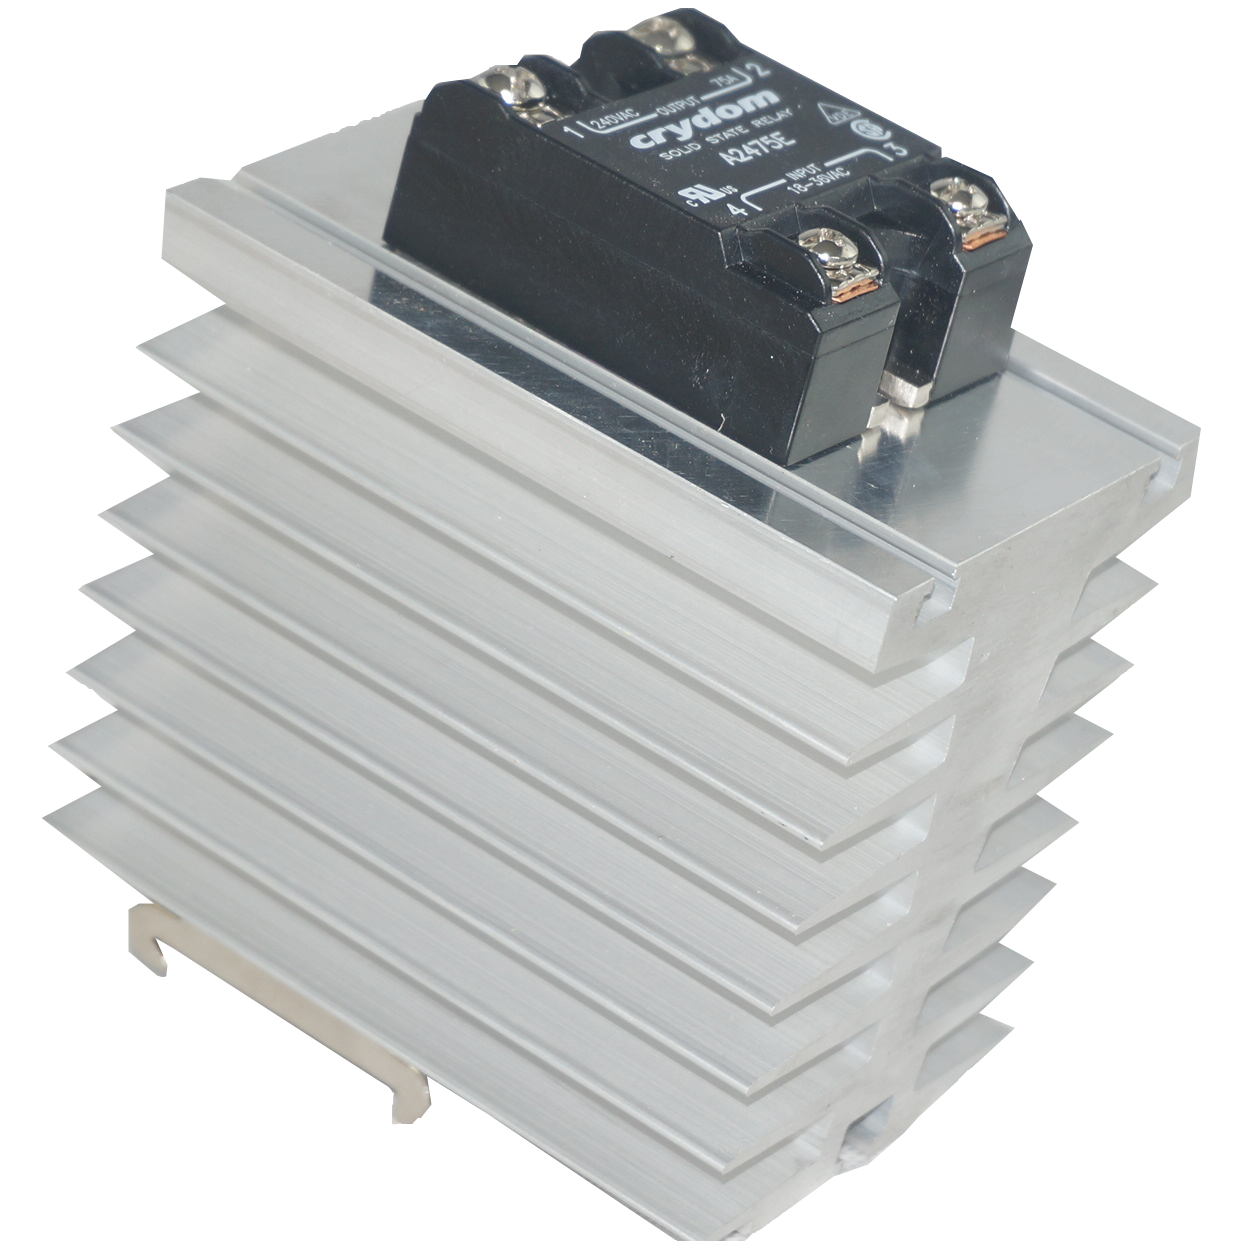 GFIN/150M-DR + HD4875, Din Rail Mount Solid State Relay with Heatsink, 4-32VDC Control Input, 48-530VAC Output, 68 Amps @ 40 Deg C ambient